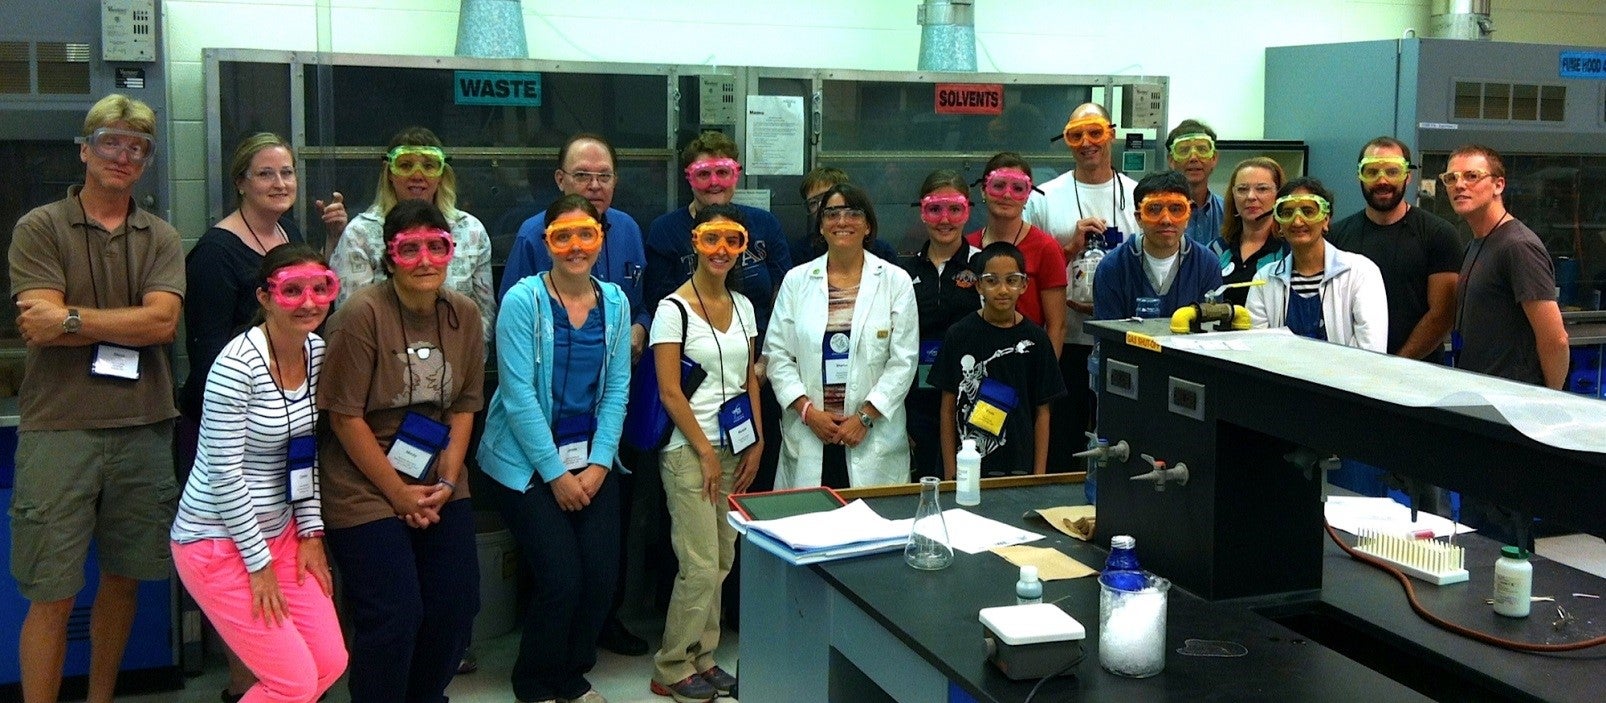 A large group of ChemEd attendees with brightly coloured goggles in front of a fume hood in a lab setting. (Sharon Geyer's session, with Sharon in the front row in a white lab coat).